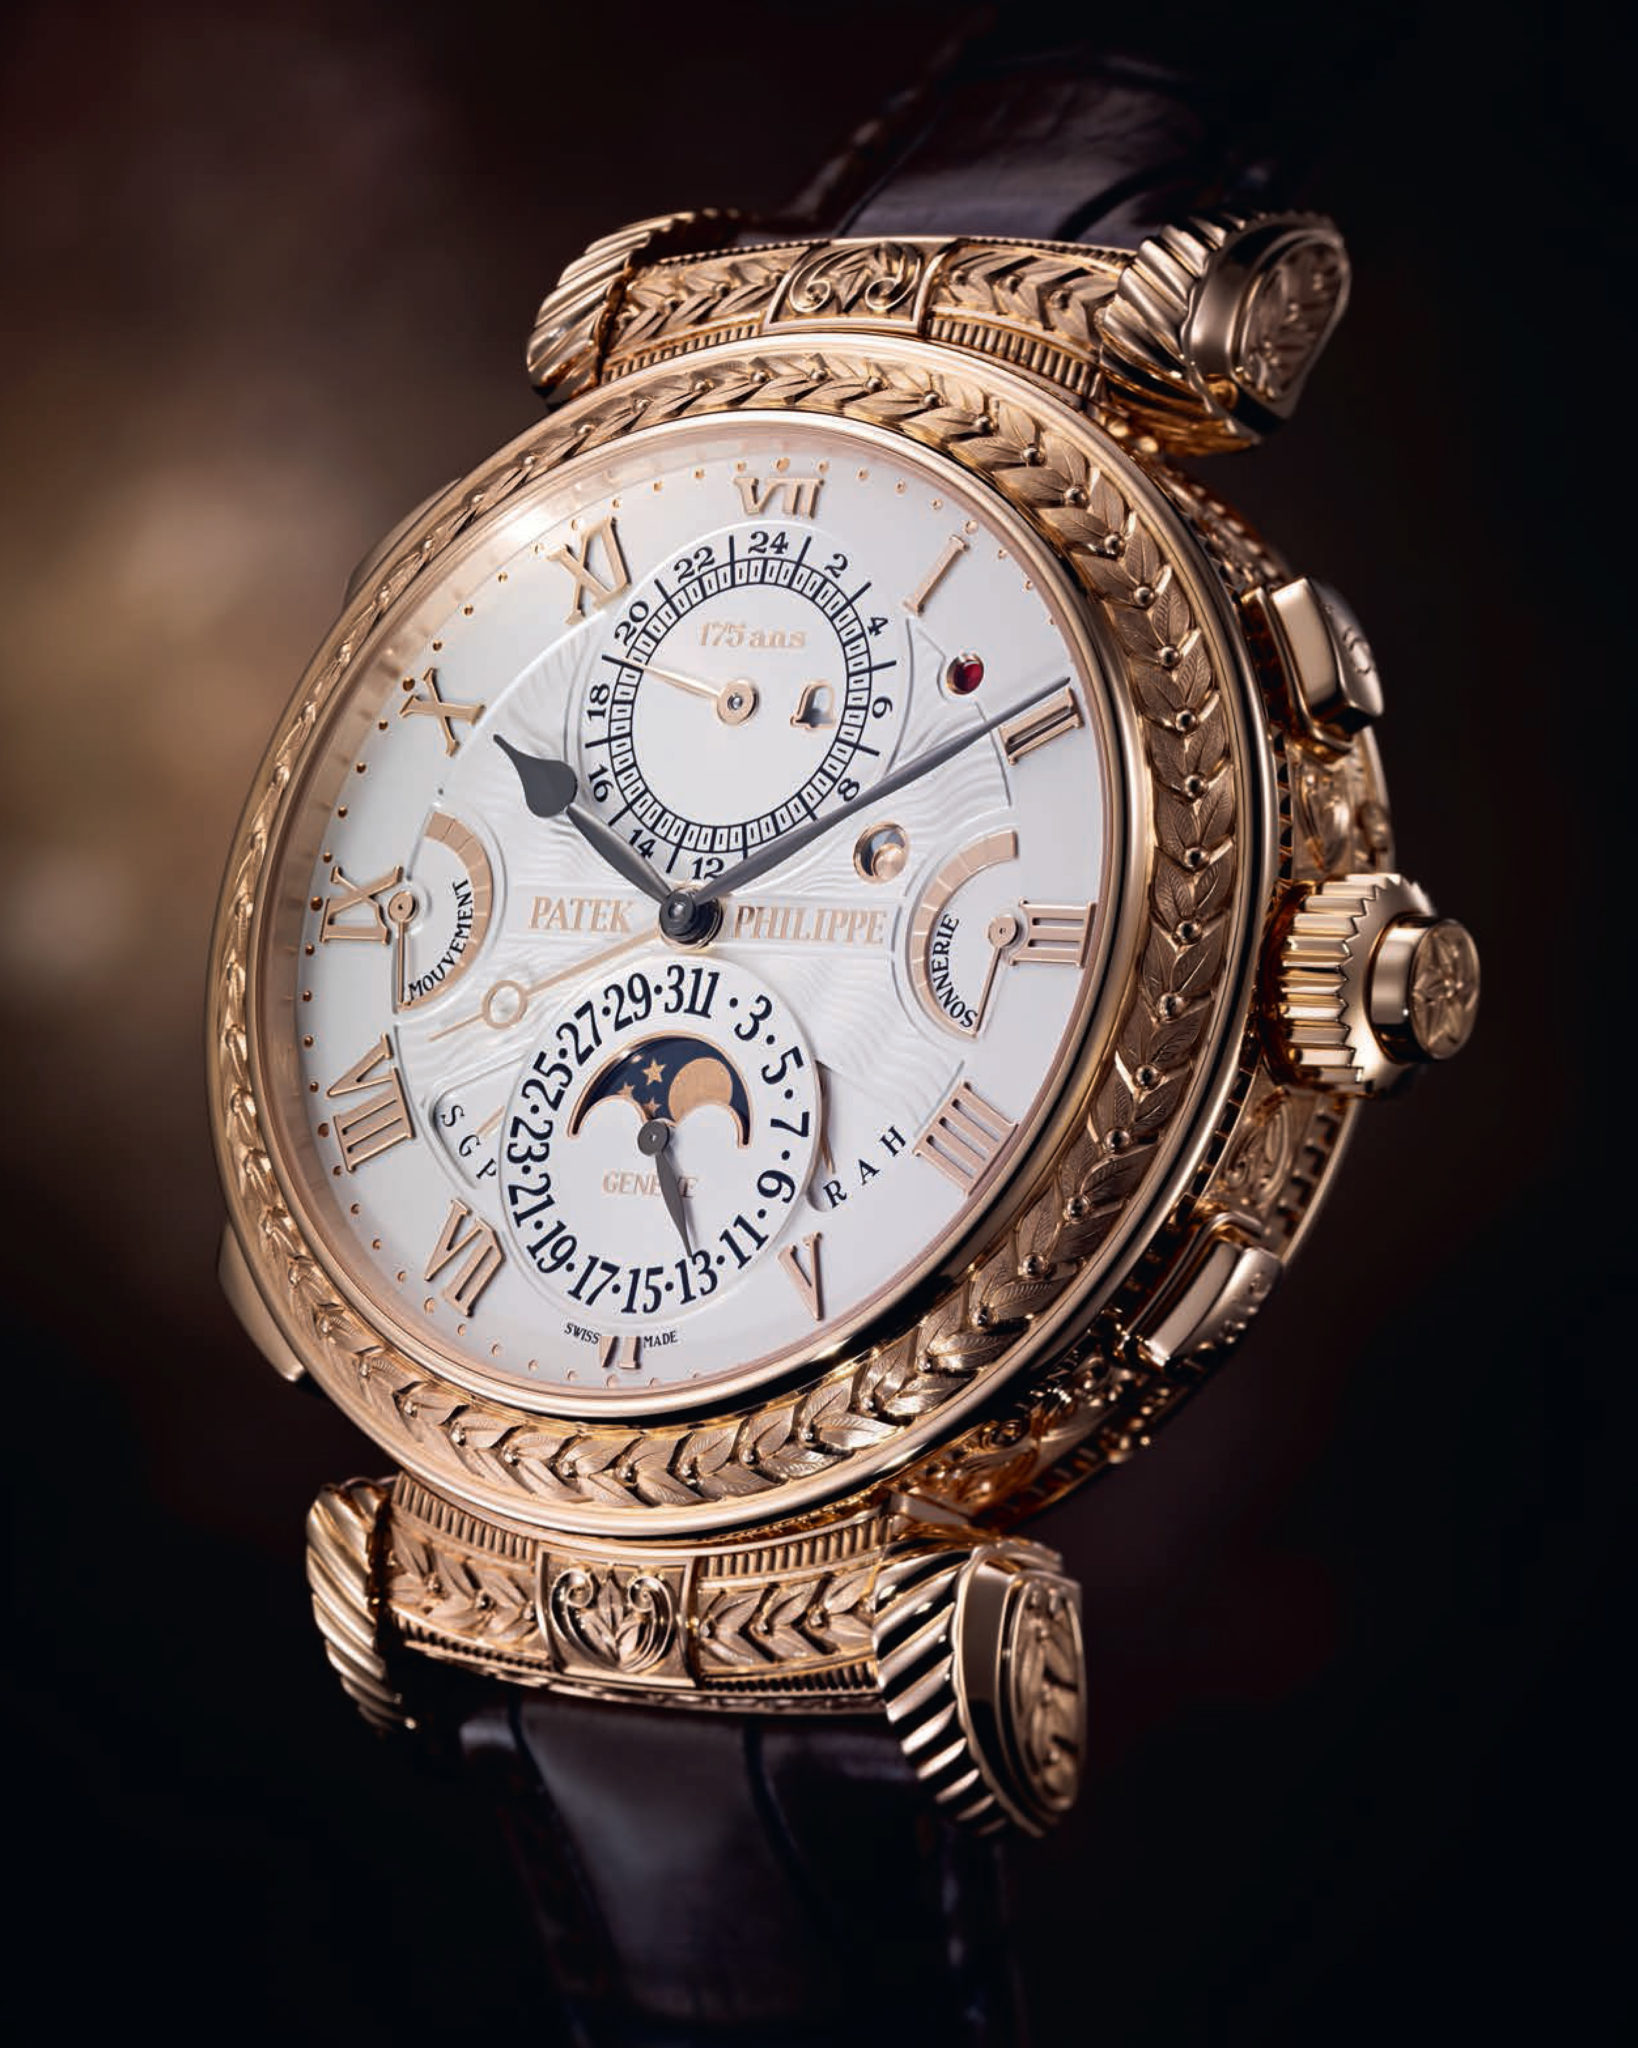 This $31M Patek Philippe Is Now the Most Expensive Watch in the